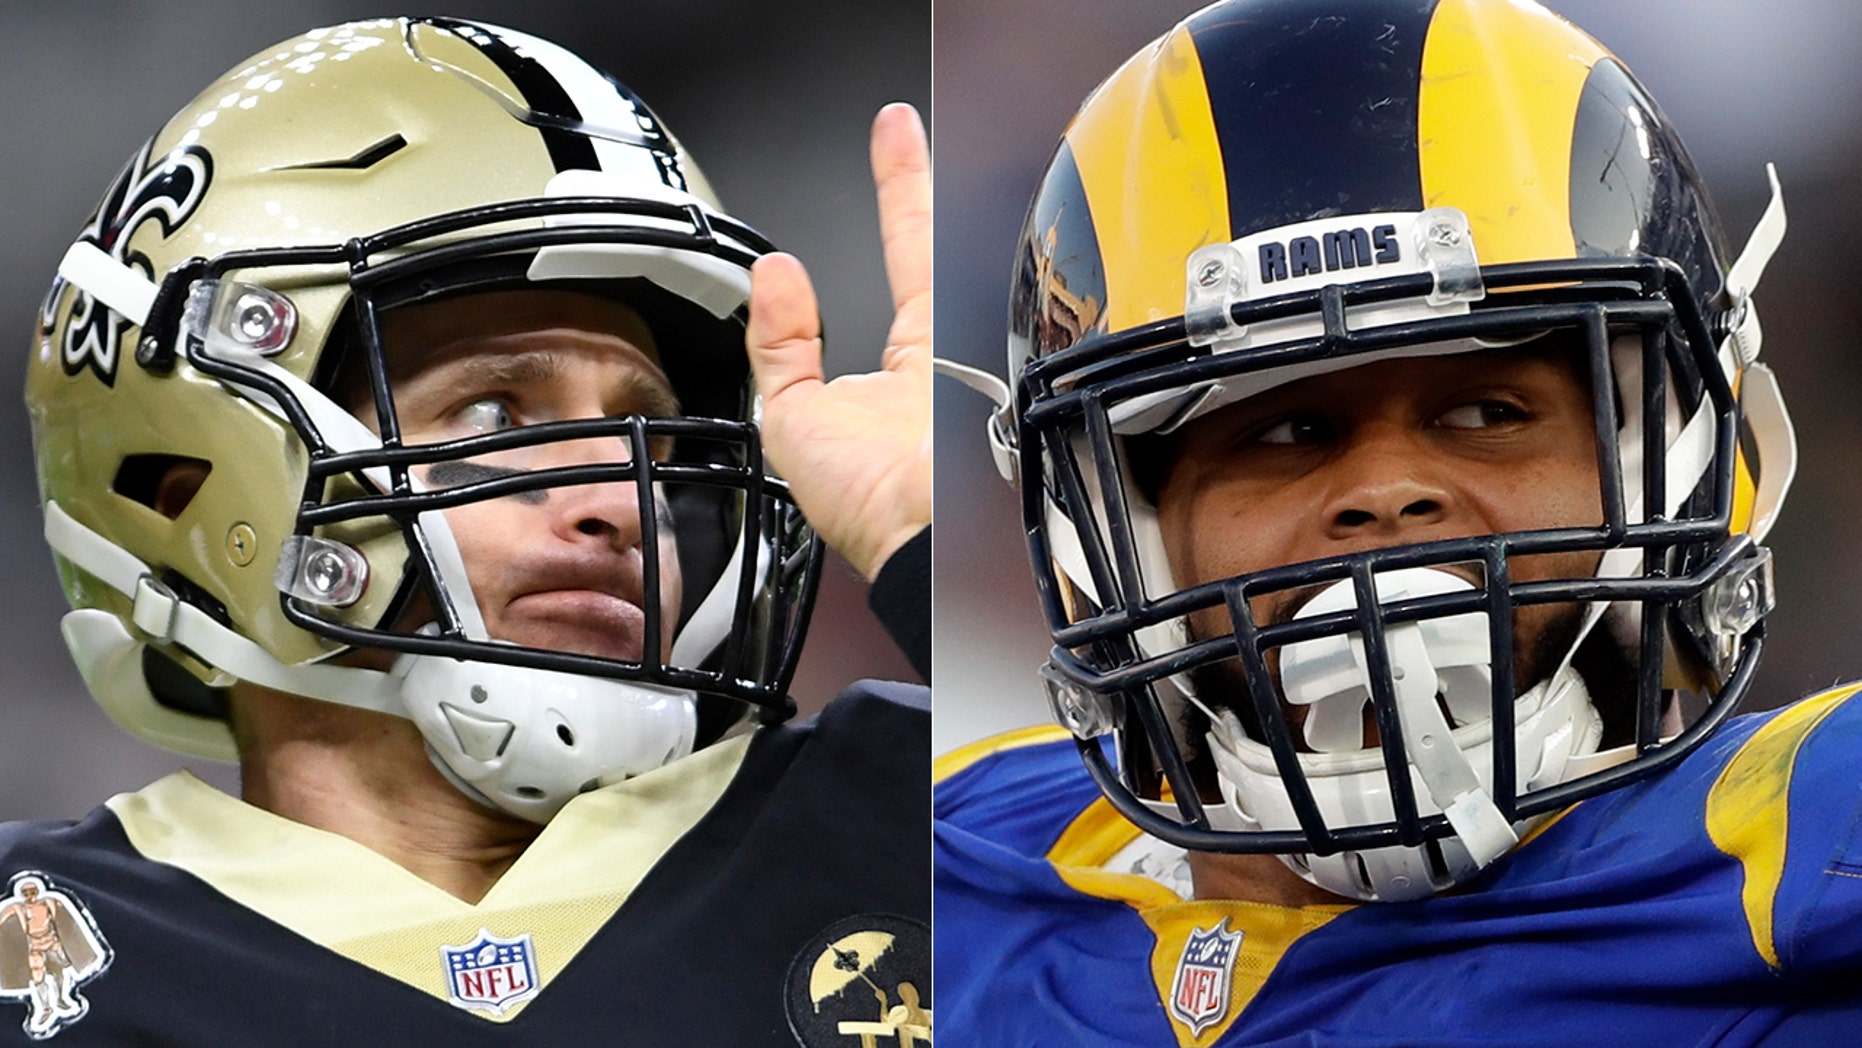 Saints vs Rams: 5 things to know about the NFC Championship game